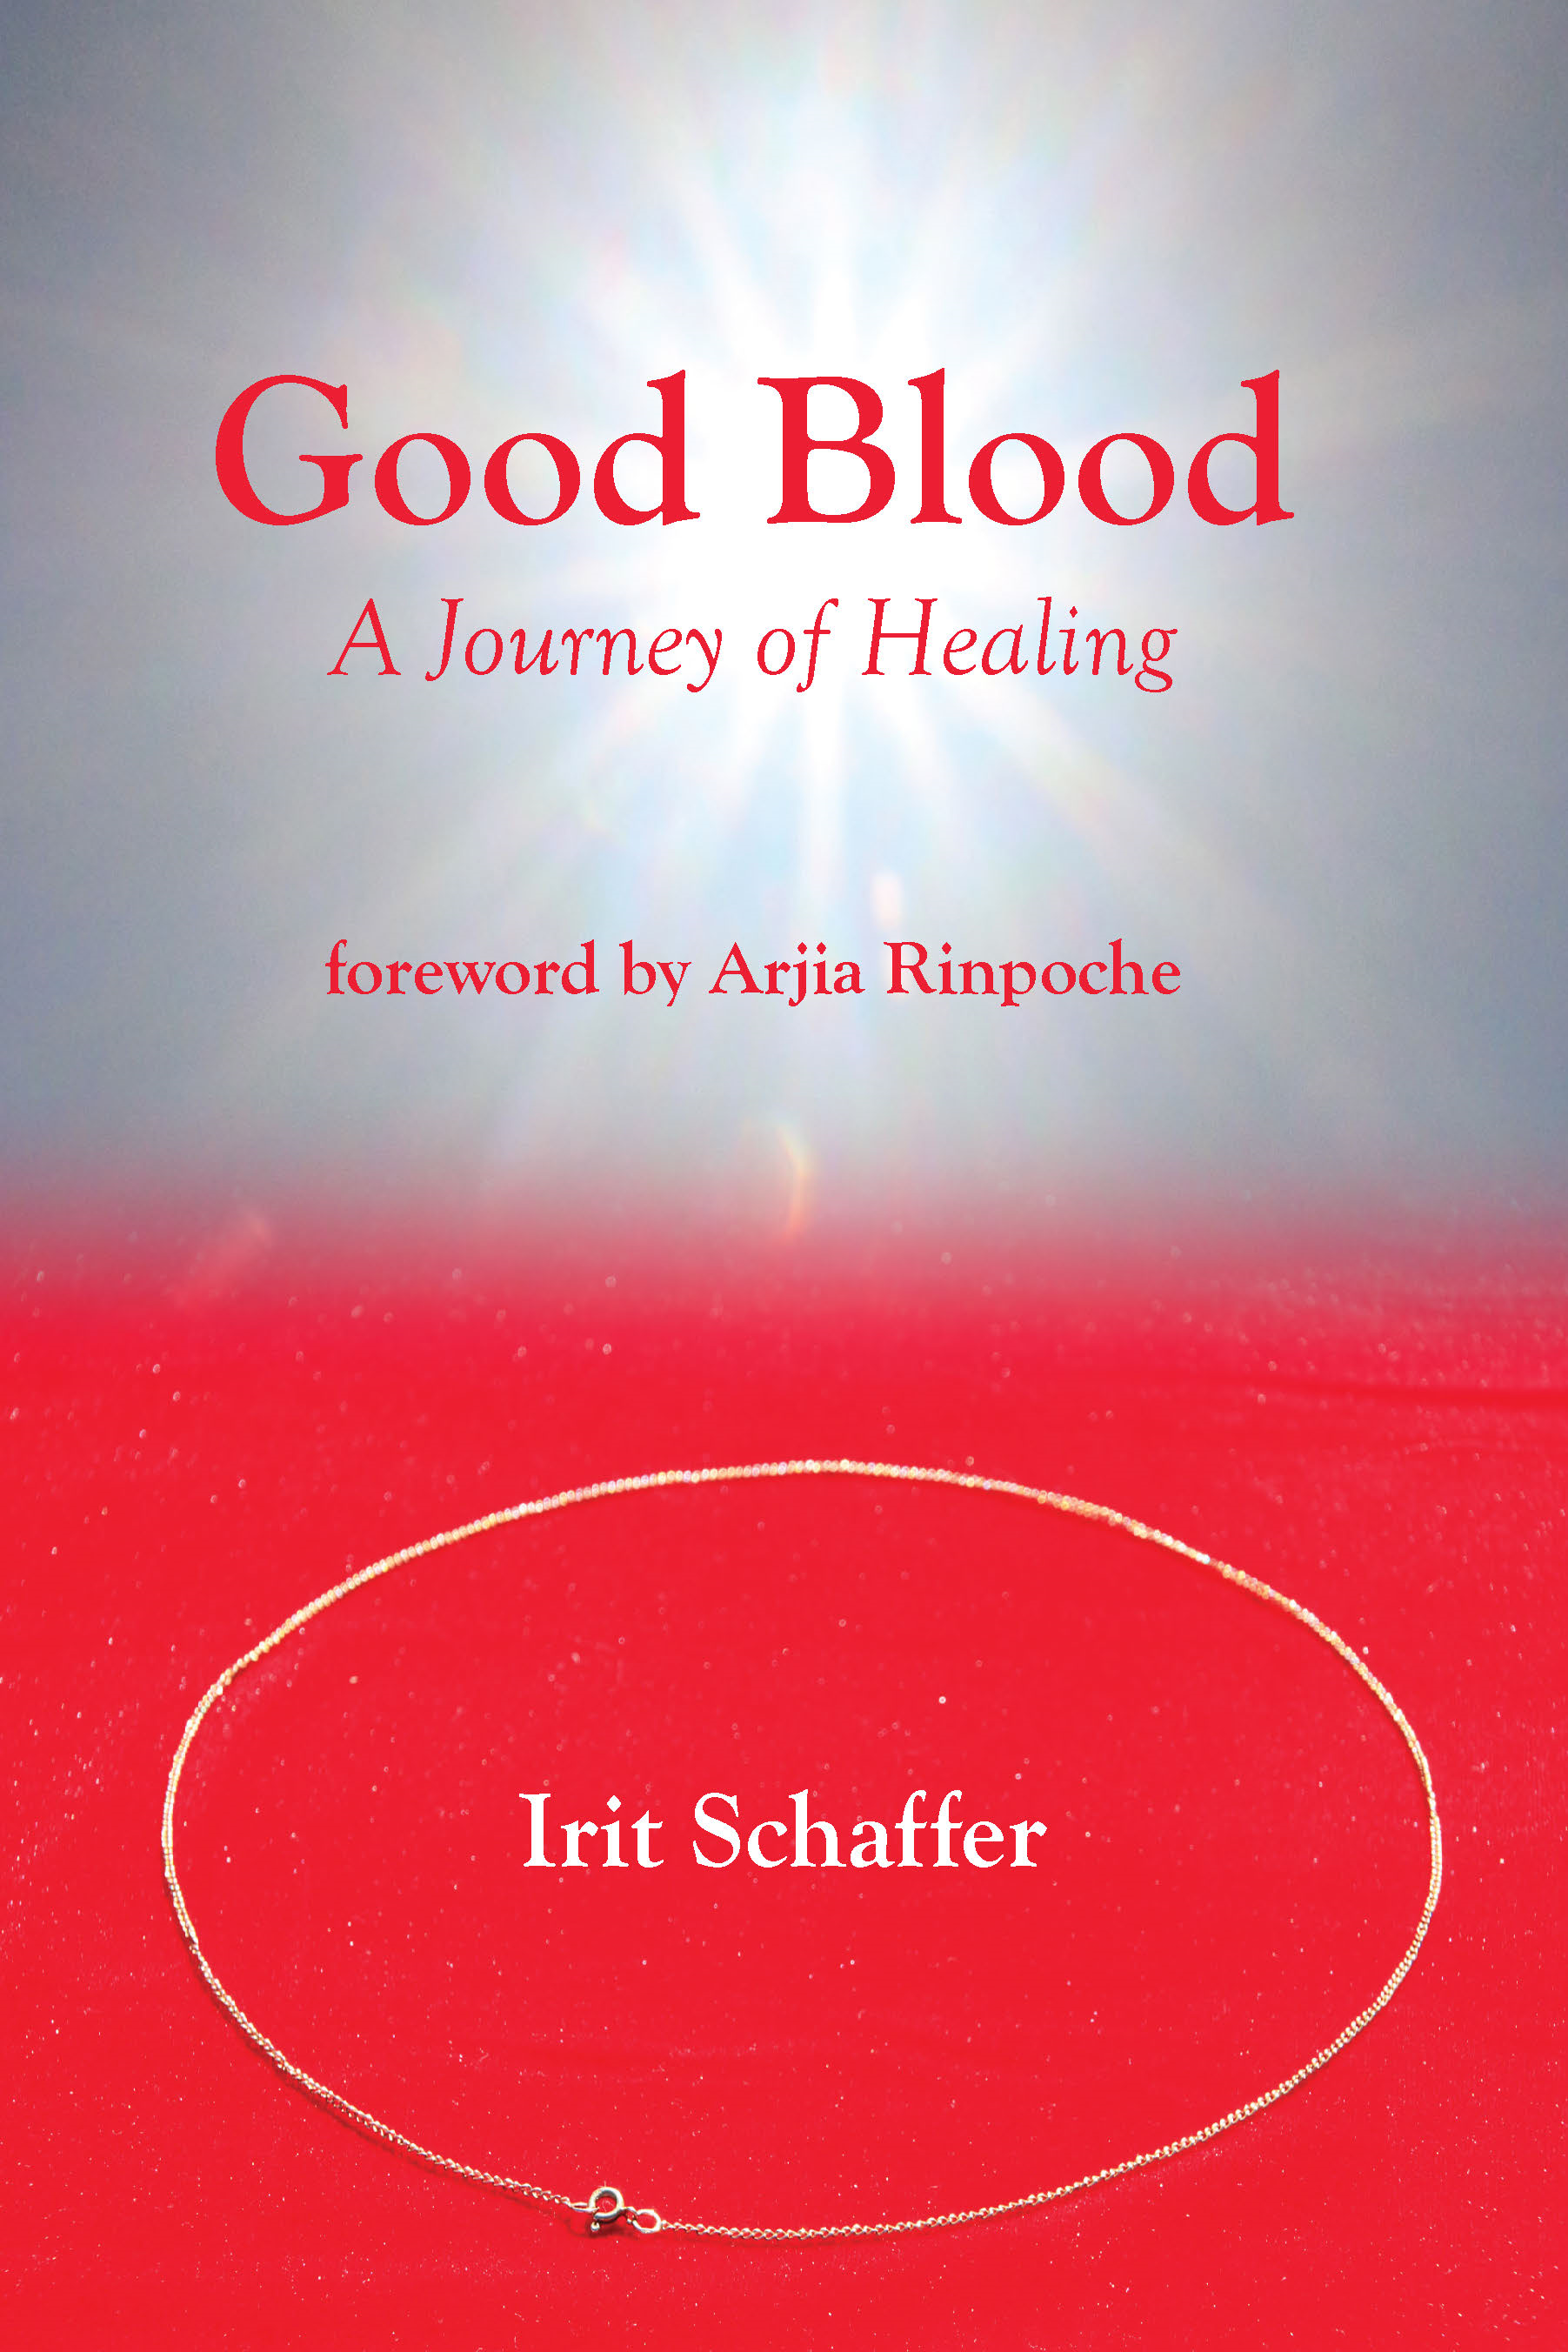 Good Blood: A Journey of Healing, second edition